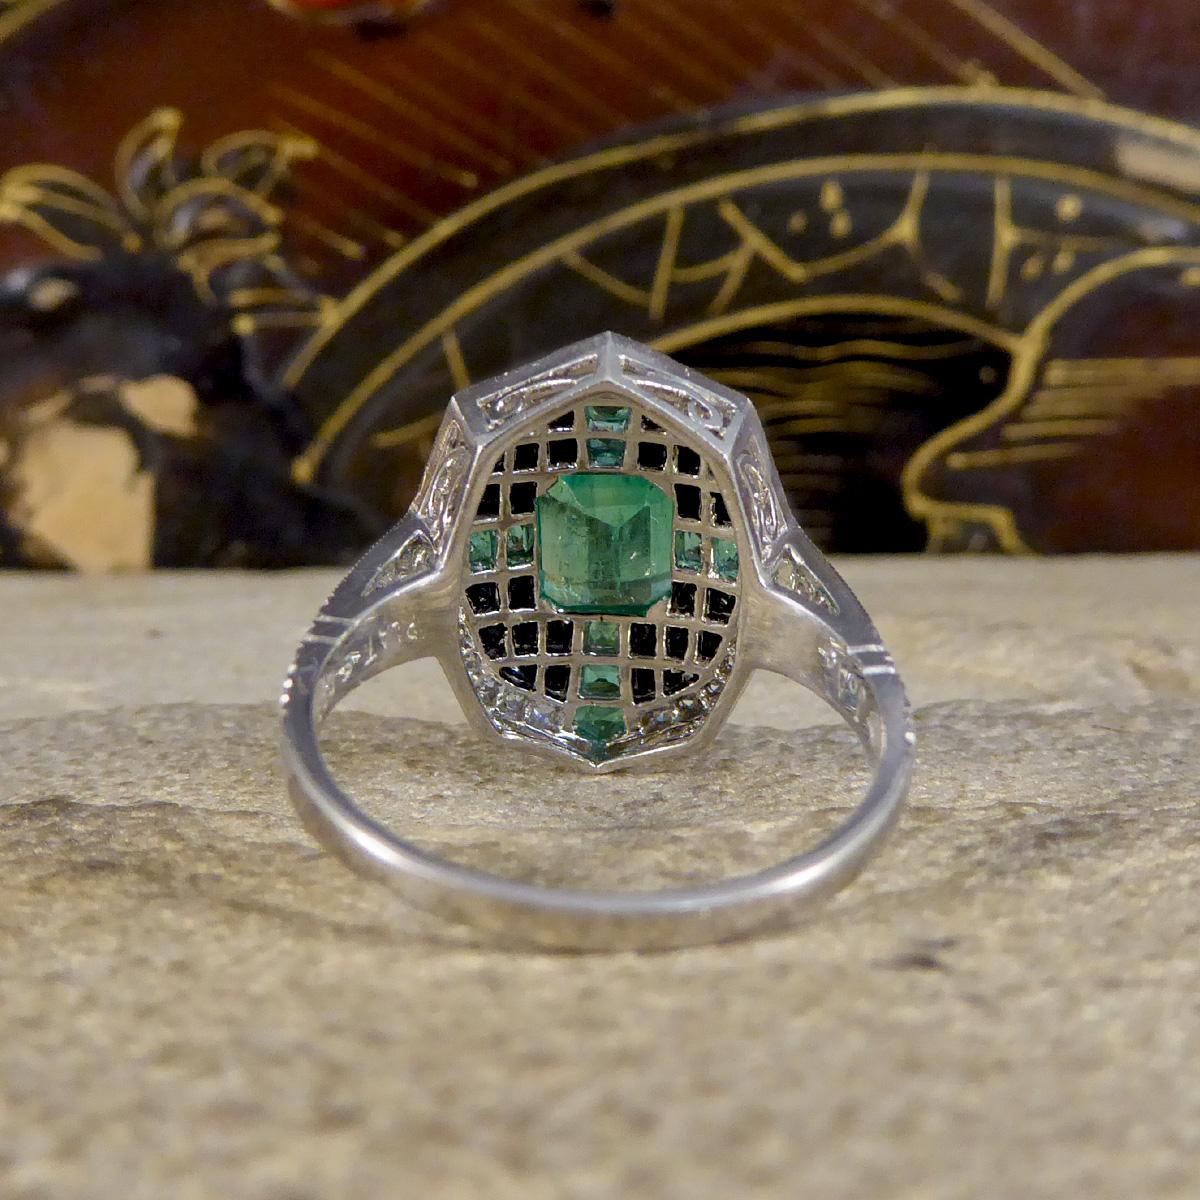 Brilliant Cut Art Deco Style Vintage Emerald Onyx and Diamond Geometric Cluster Ring in Plat